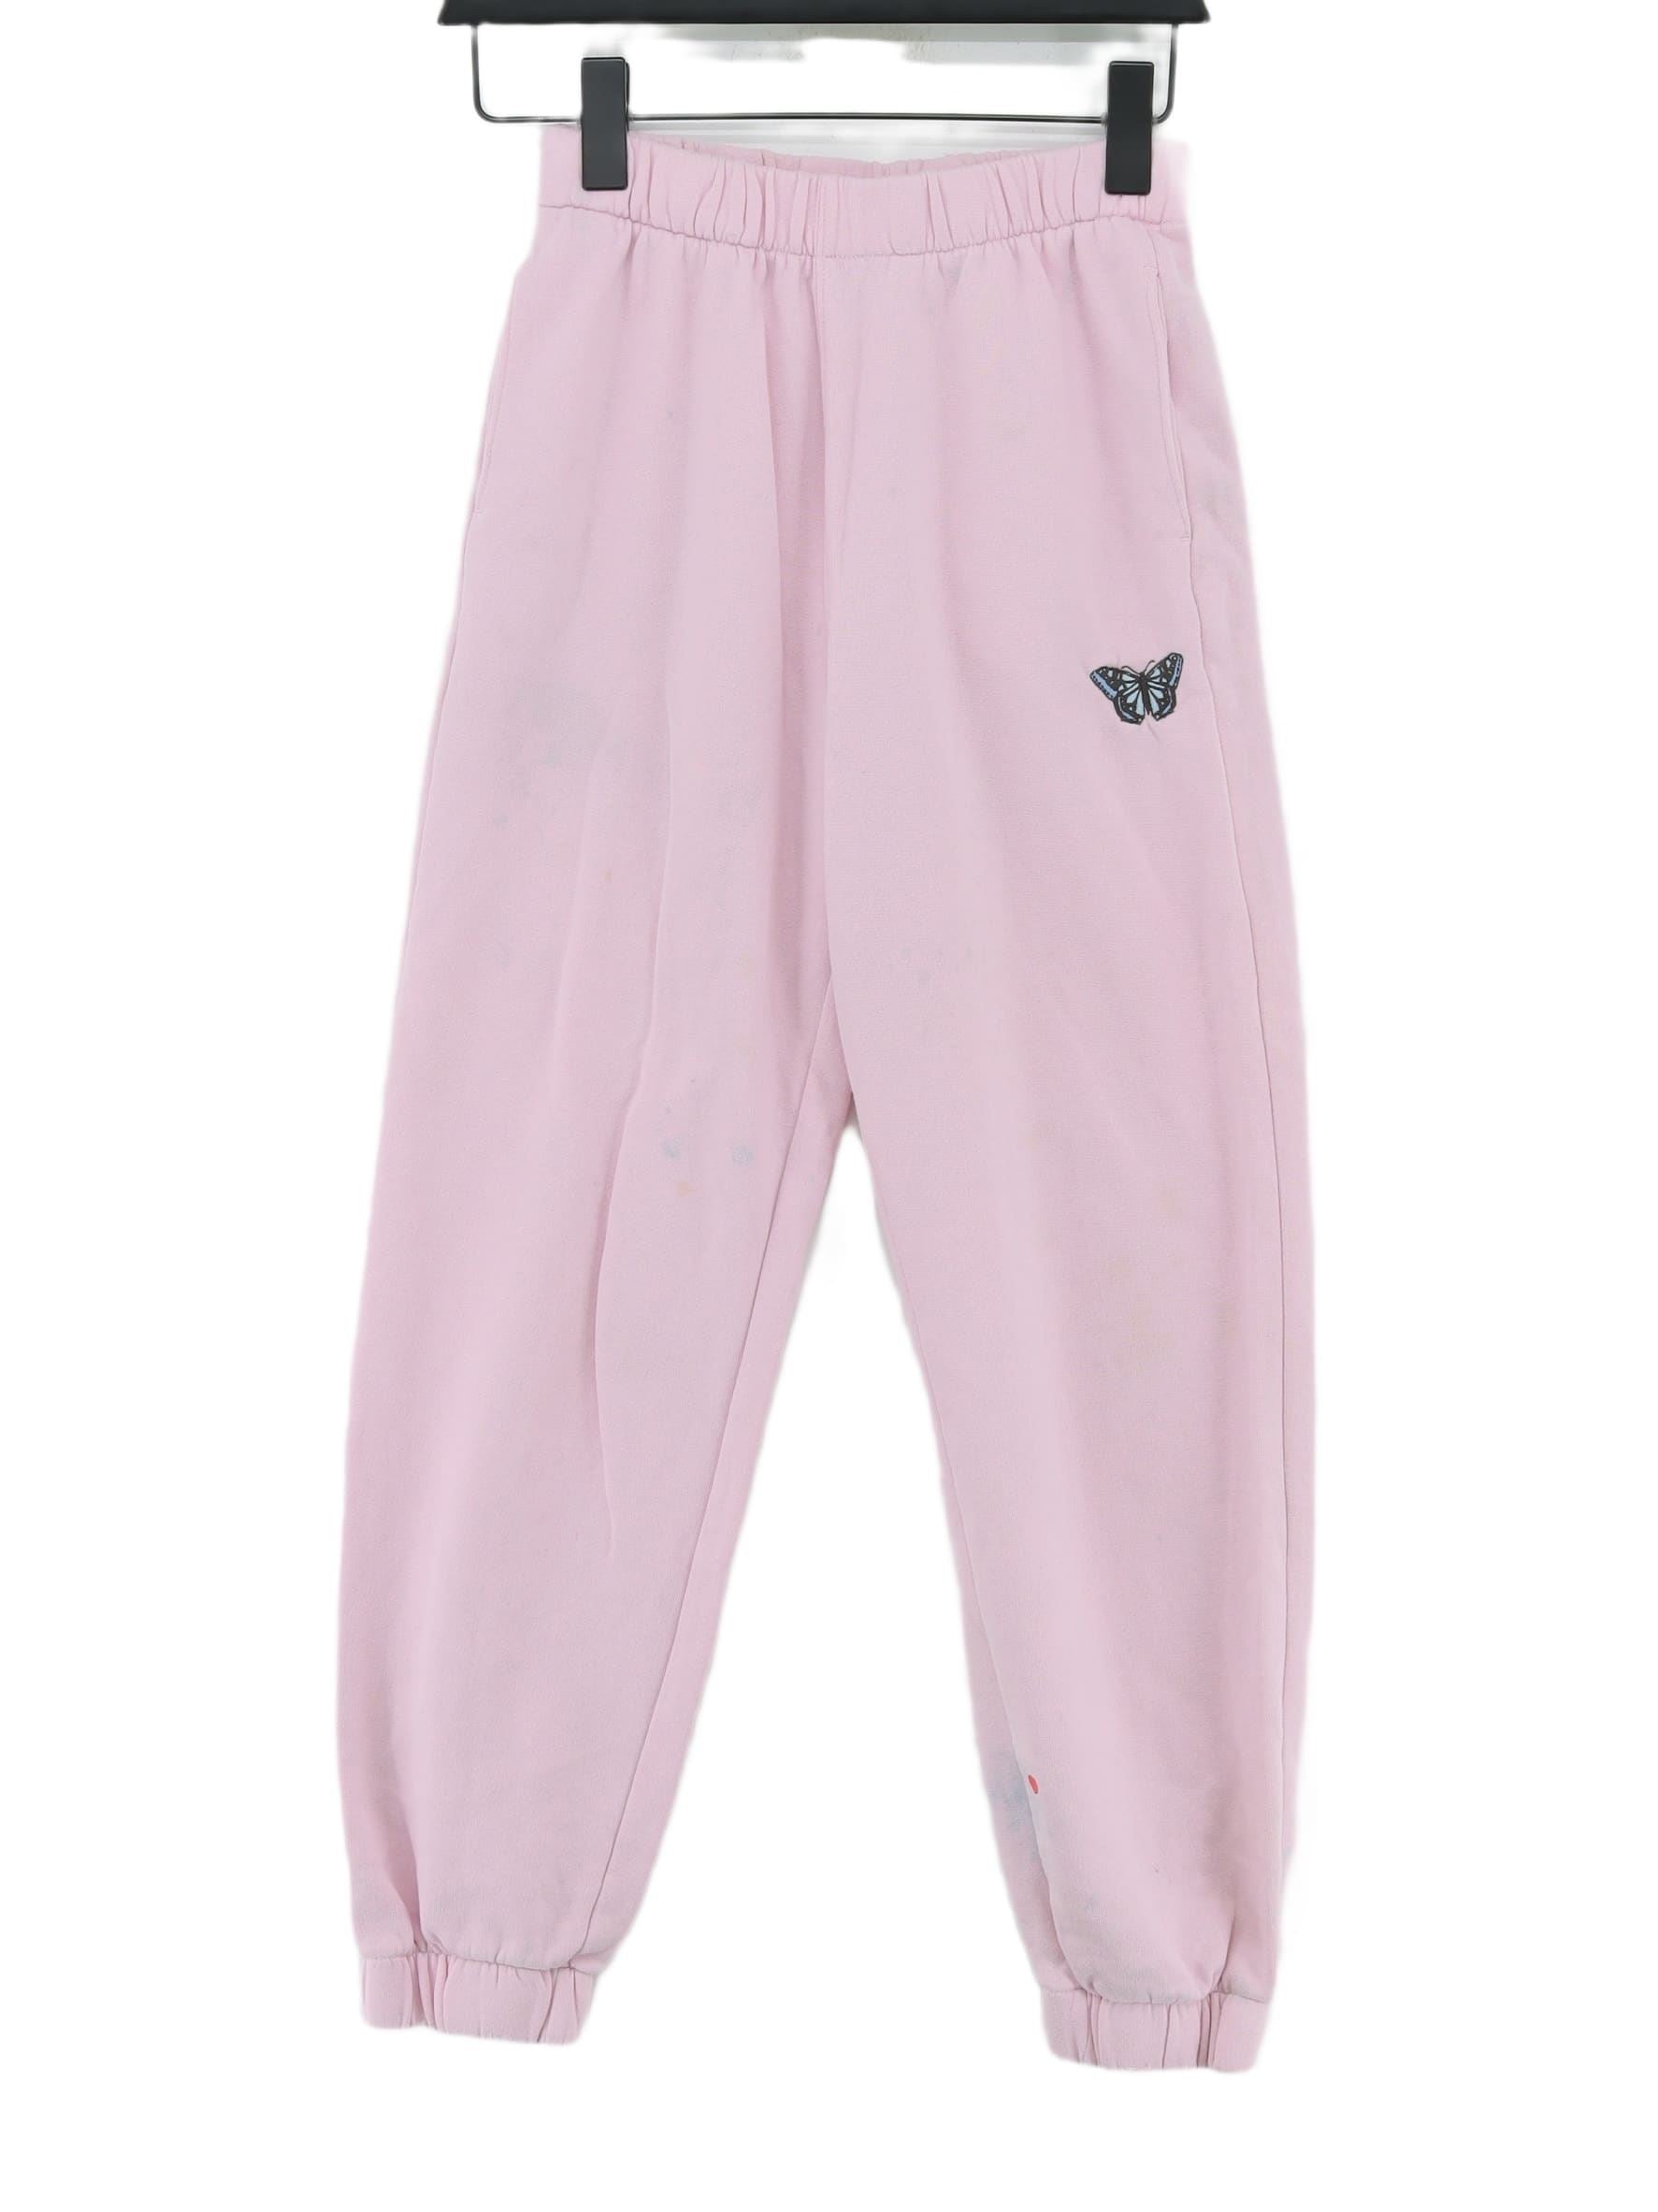 Hollister Women's Sports Bottoms S Pink Cotton with Polyester